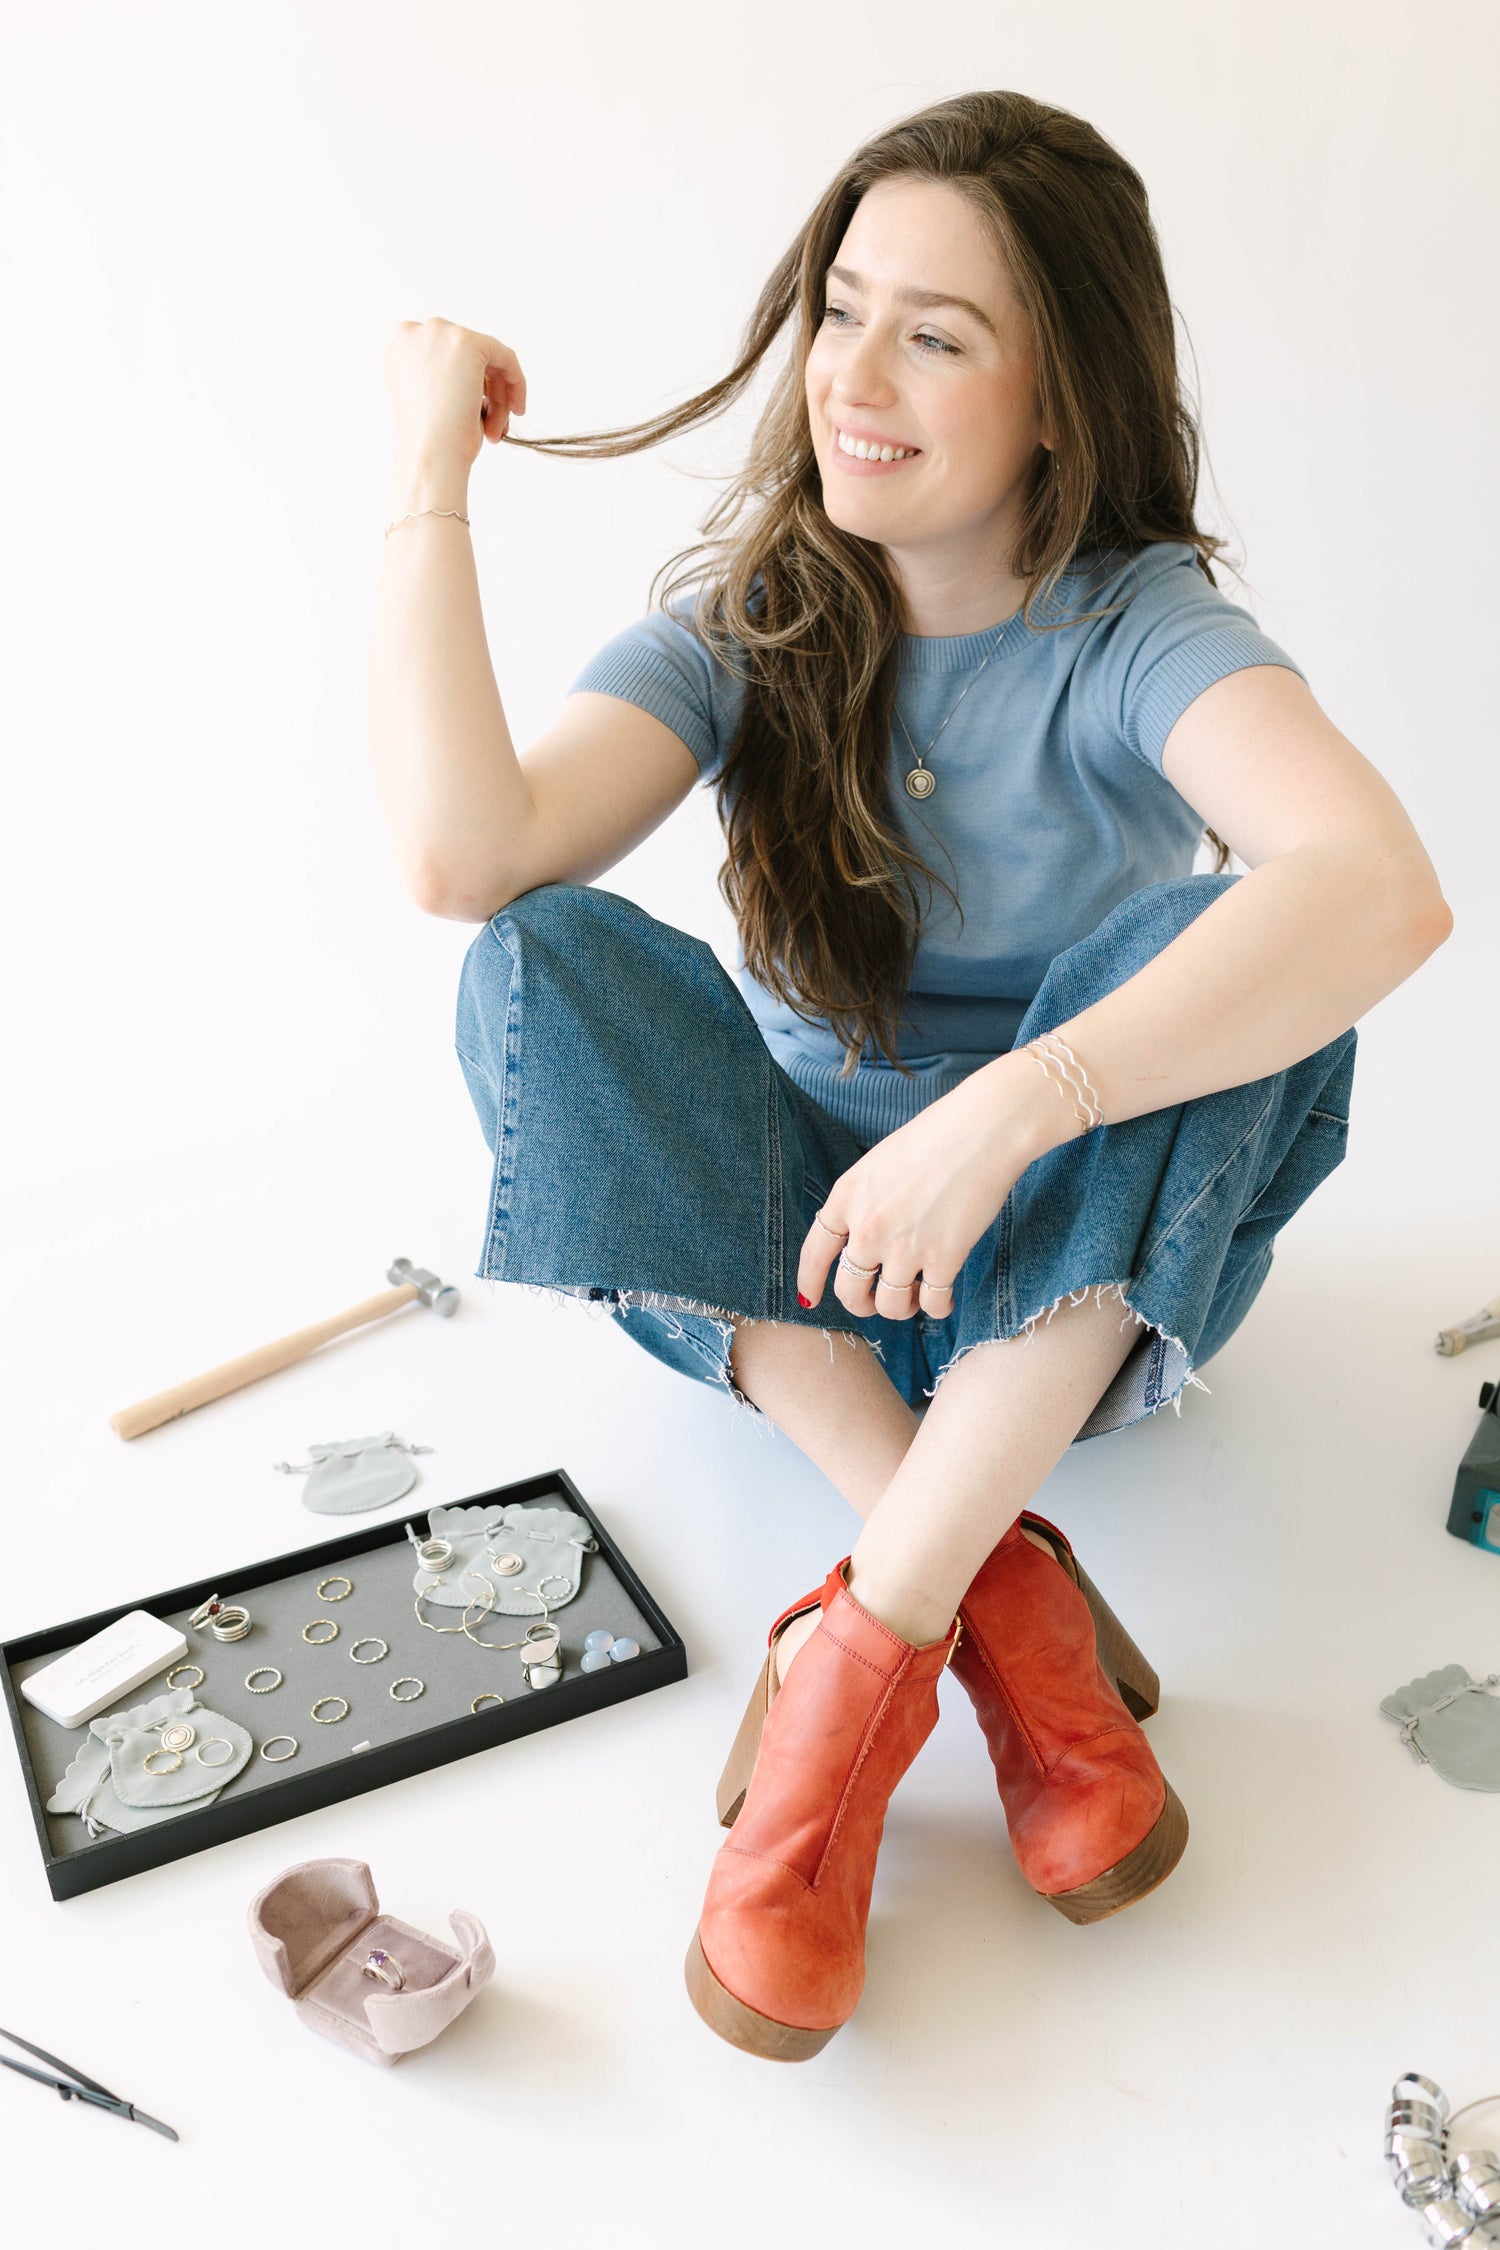 Jewelry designer Lily Wujek sits on the floor with white background, wearing red shoes and jewelry from her collection and surrounded by her jewelry-making tools